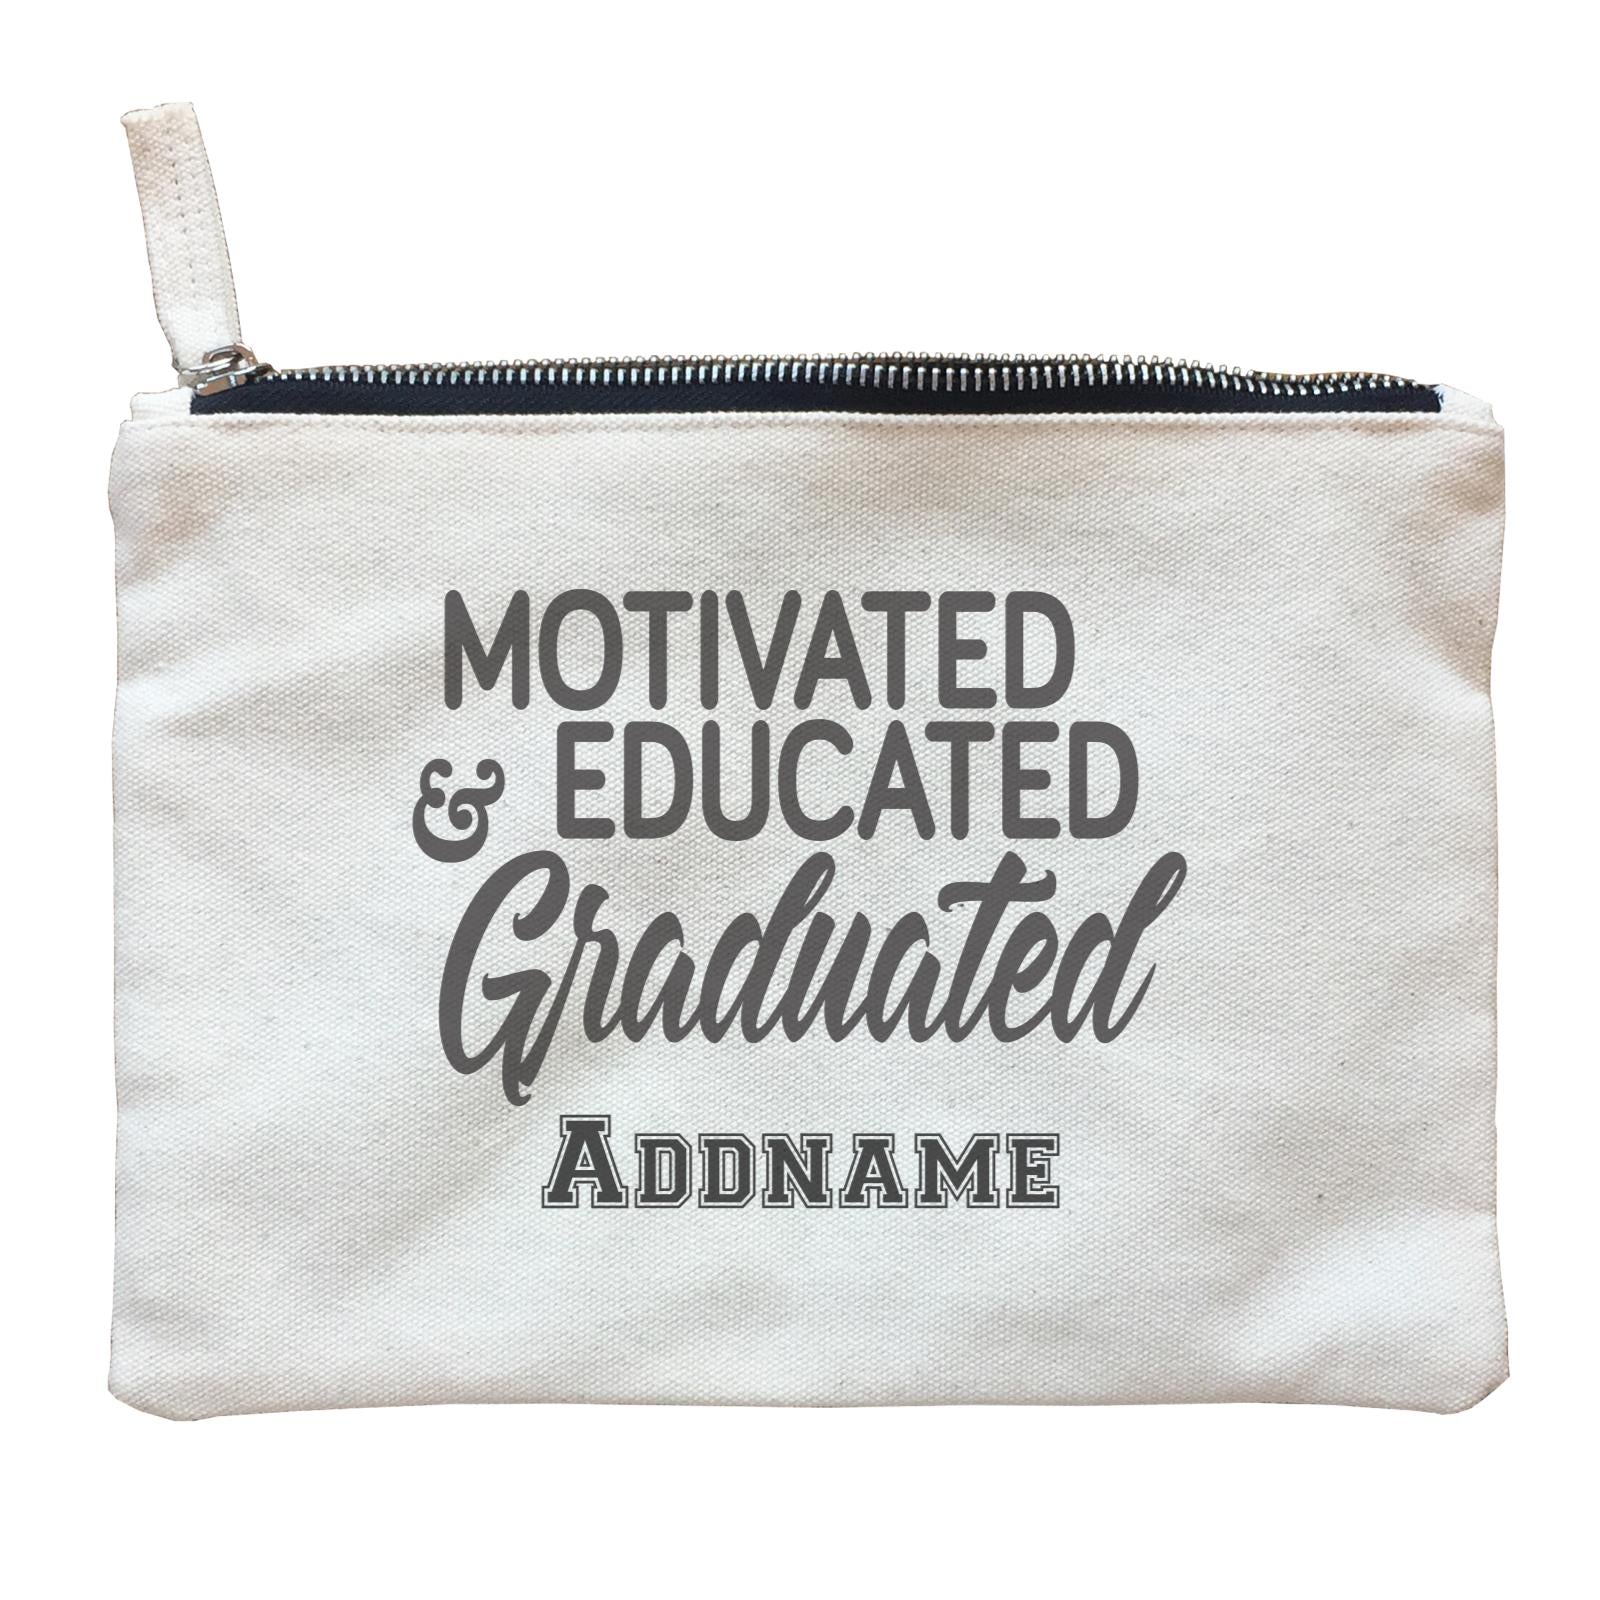 Graduation Series Motivated, Educated, Graduated Zipper Pouch